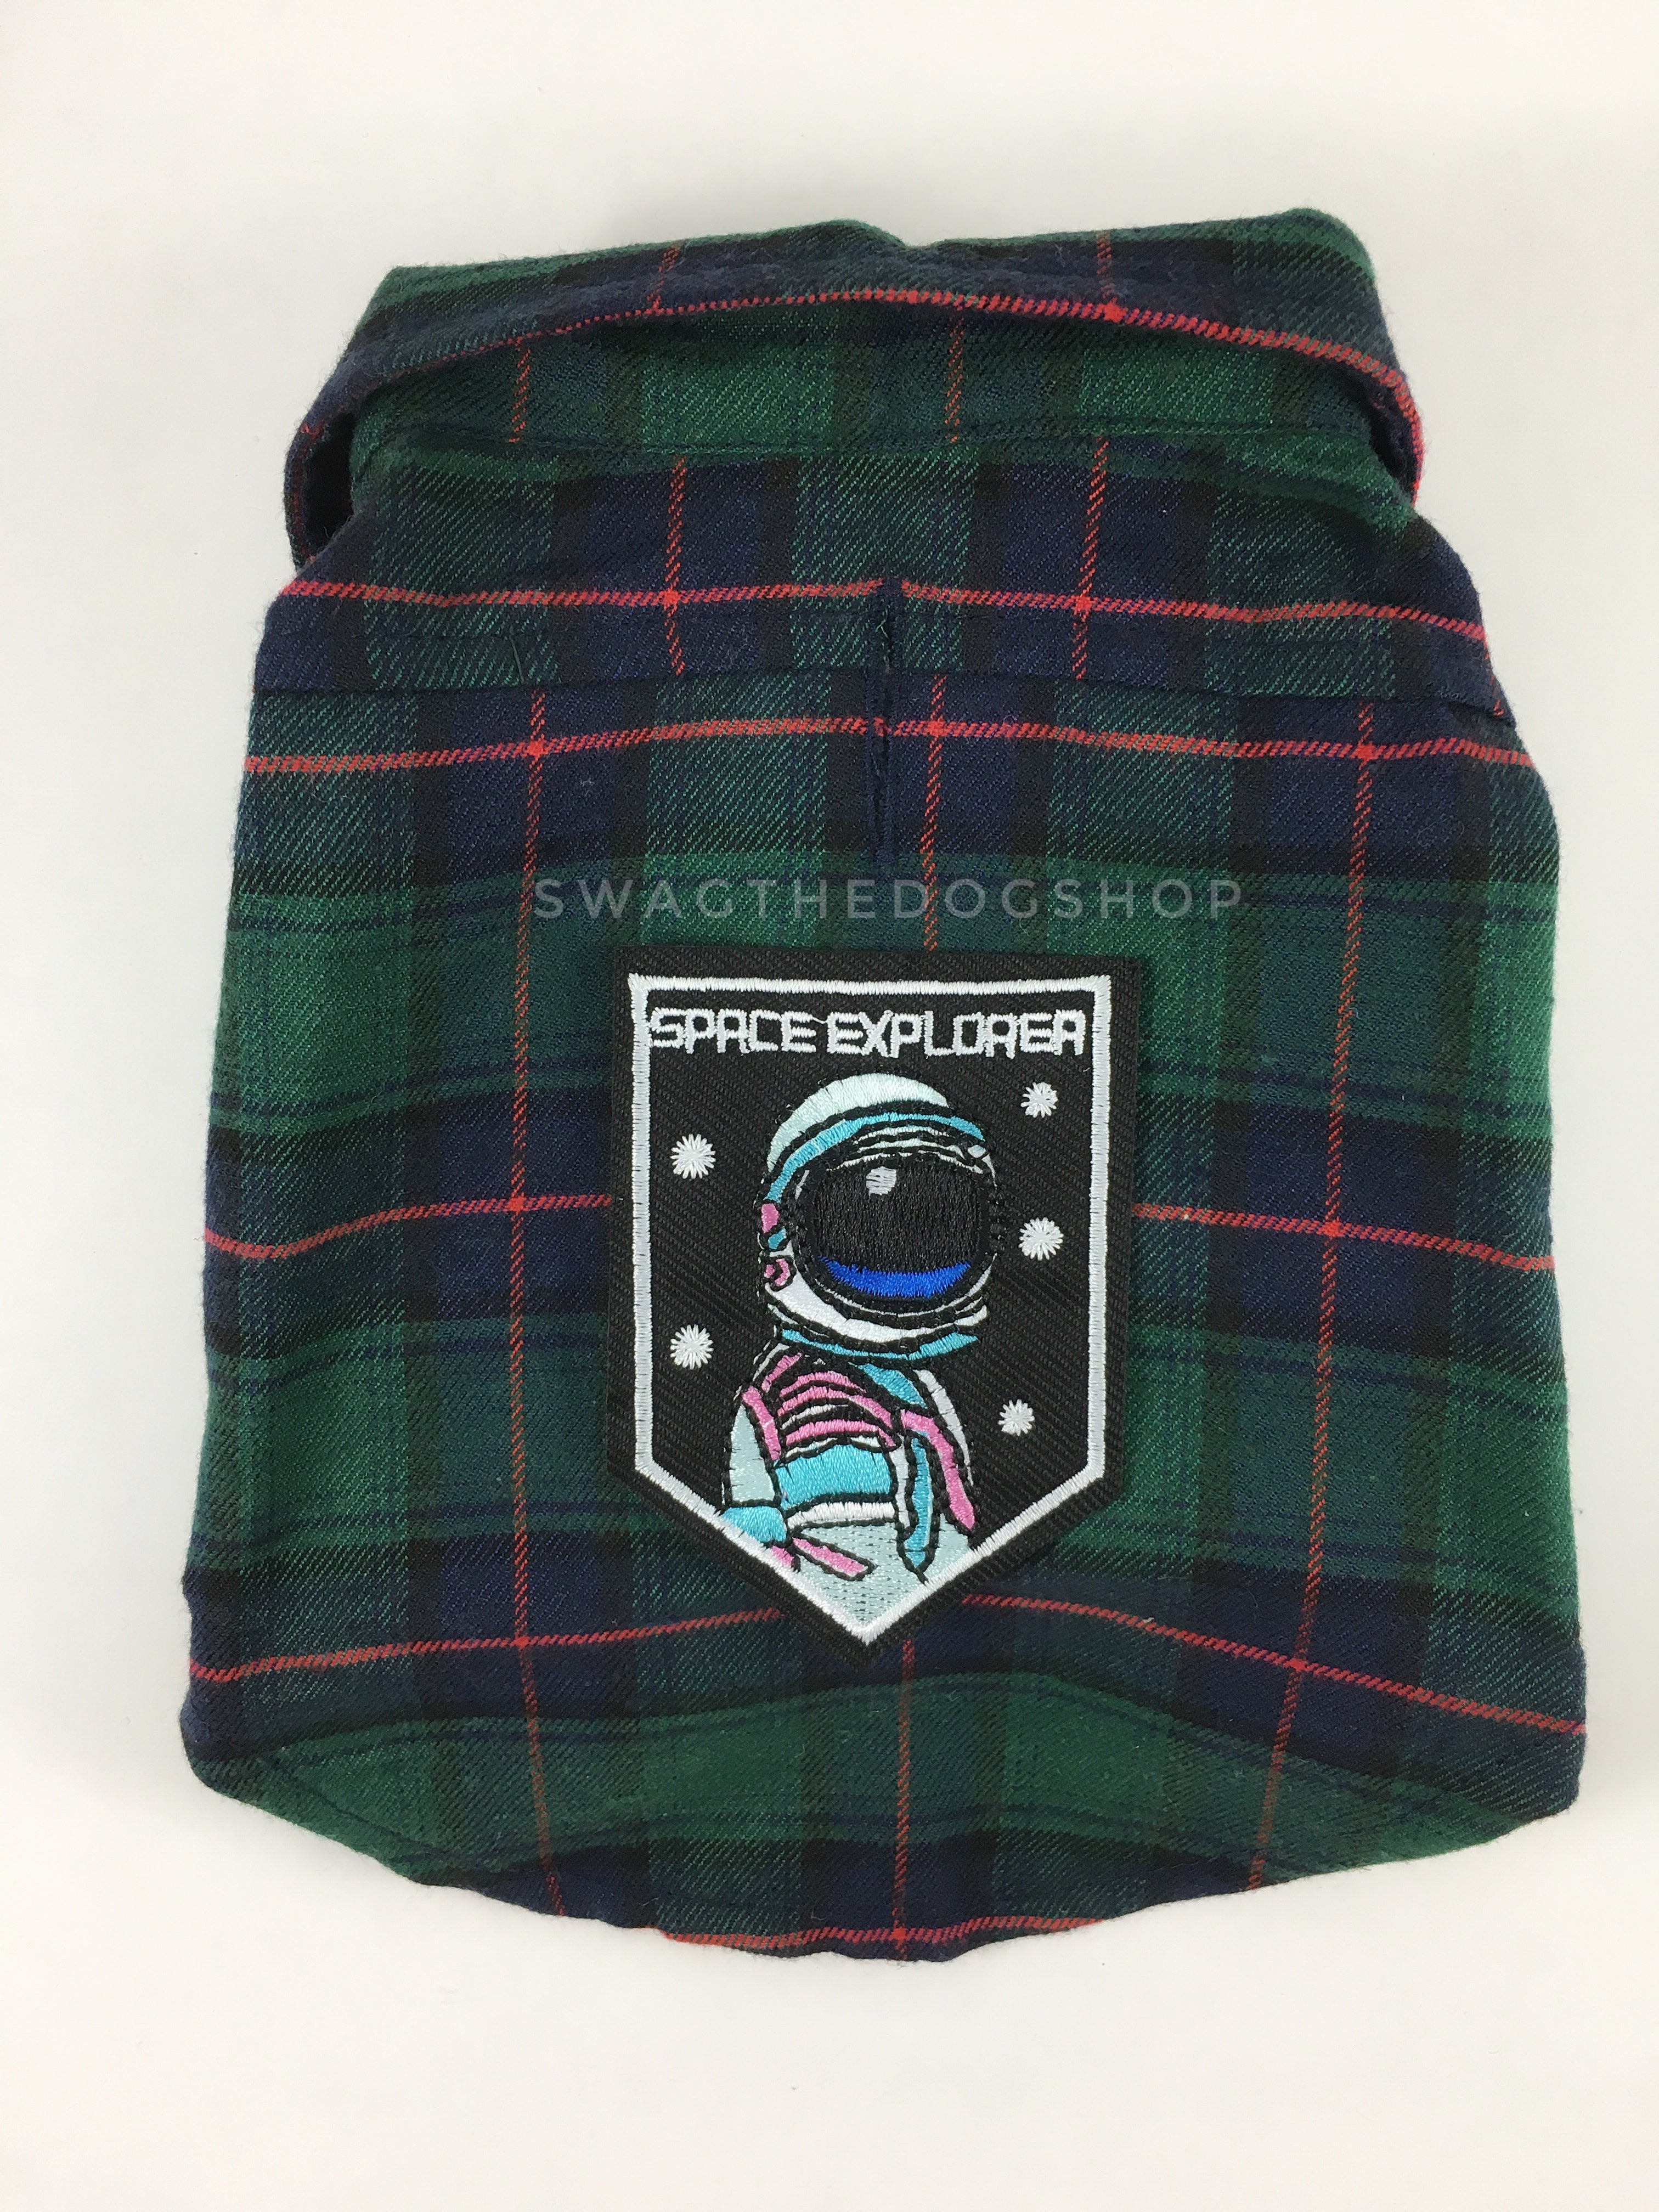 True North Green Plaid Shirt - Patch Option of Space Explorer on the Back. Green Plaid Shirt